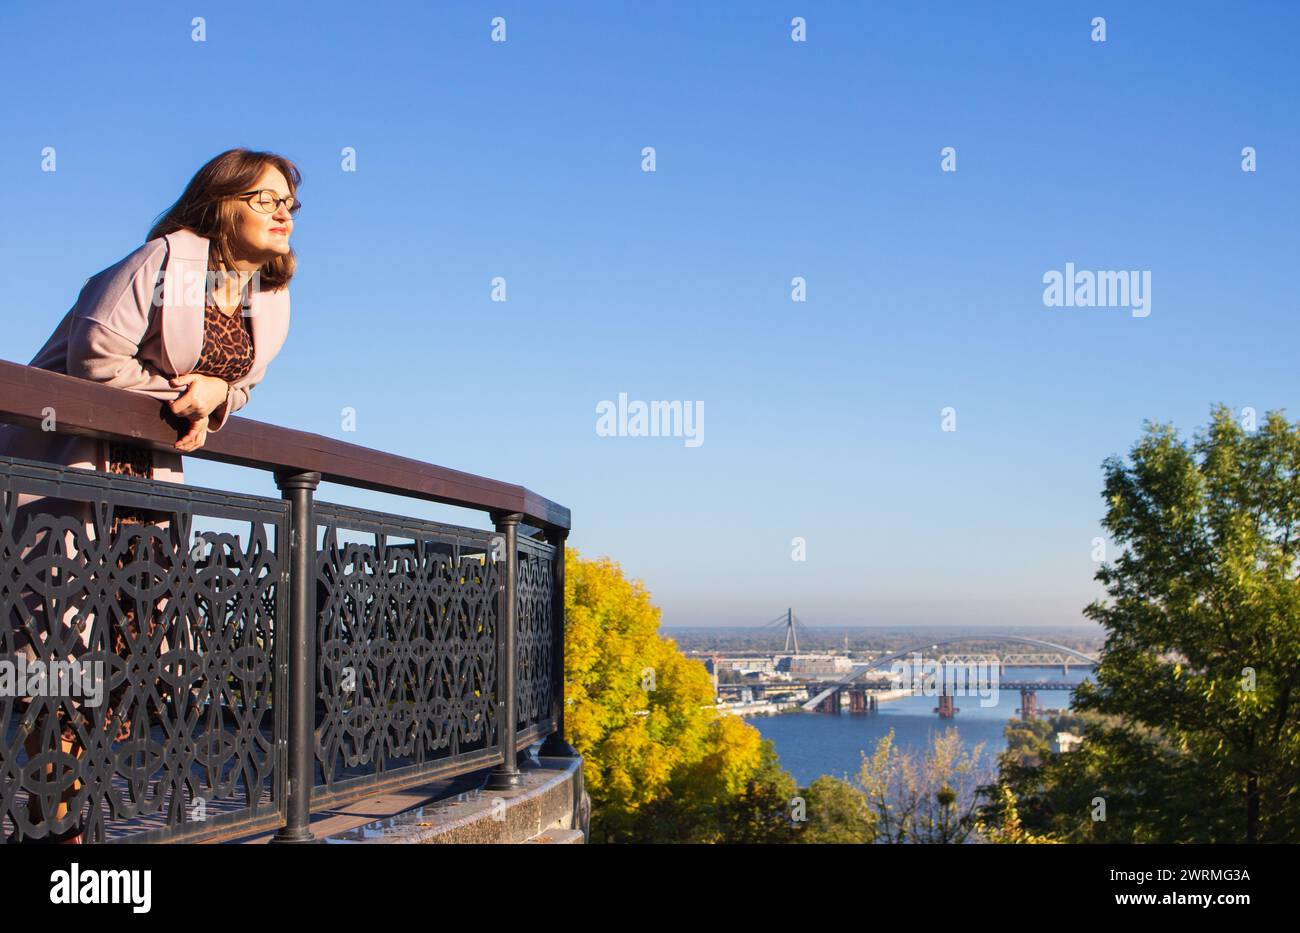 Woman in leopard dress and coat on Kyiv landscape background. Woman in glasses smiling in sunlight. Big city lifestyle. Beautiful woman in Ukraine. Stock Photo